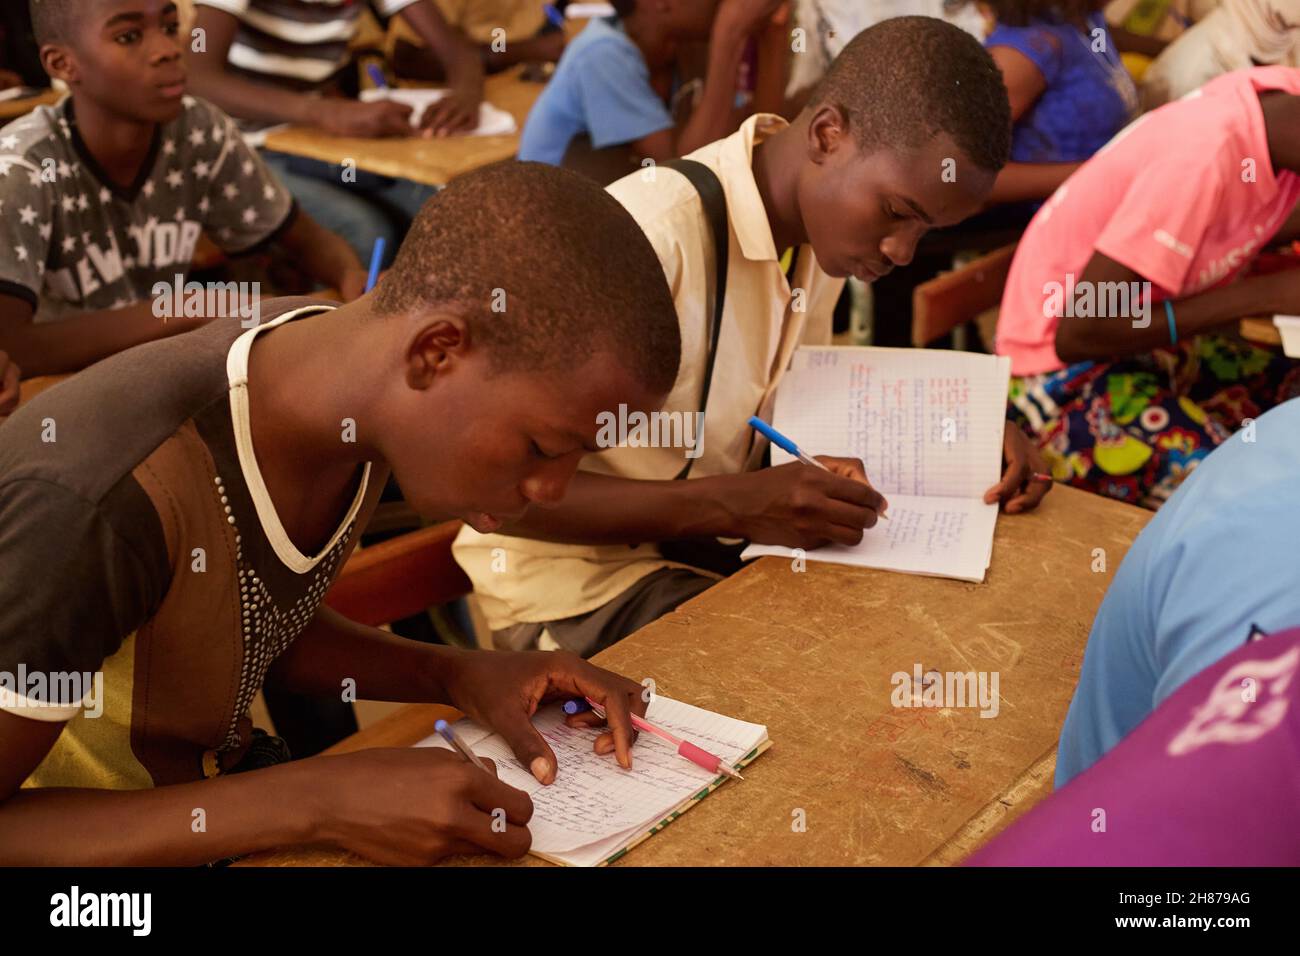 MBour. Senegal. 3th Mar, 2016. Students during a class at the ONCAD secondary school in Mbour, Senegal. © Iñigo Alzugaray/Alamy Stock Photo Stock Photo